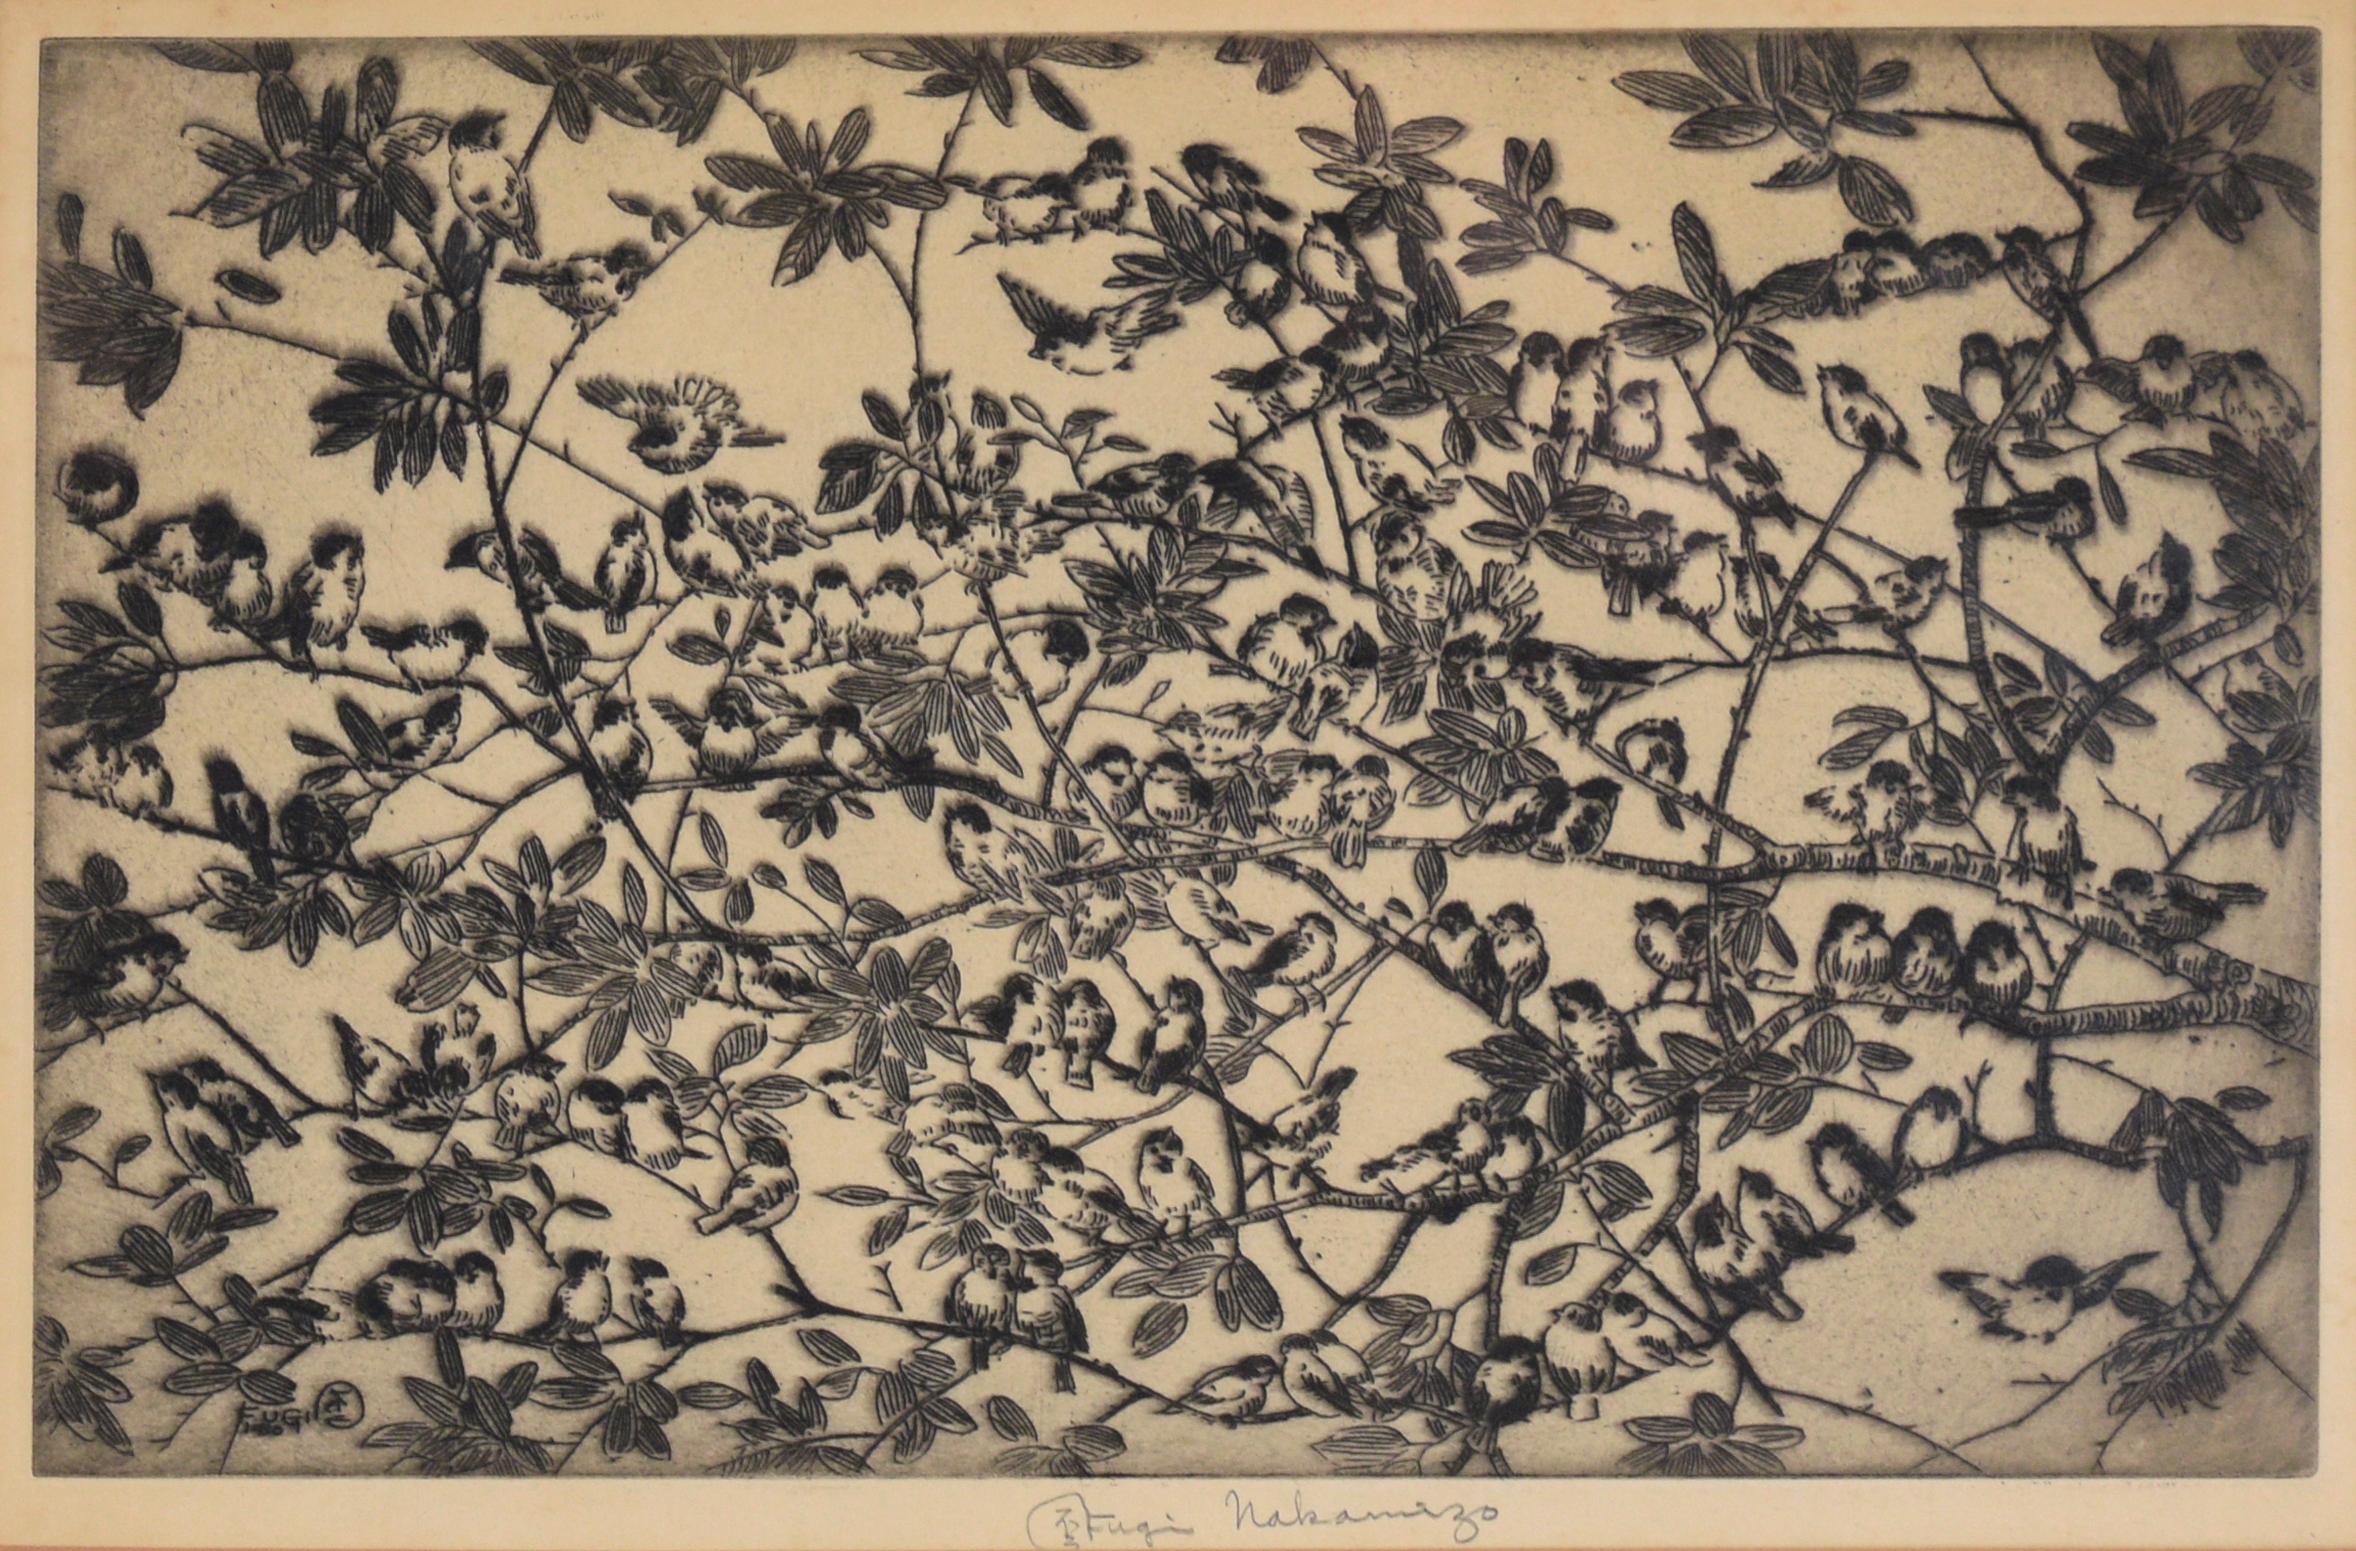 Birds on Branches - Lithograph in Ink on Paper - Edition of 75 - Print by Fugi Nakamizo